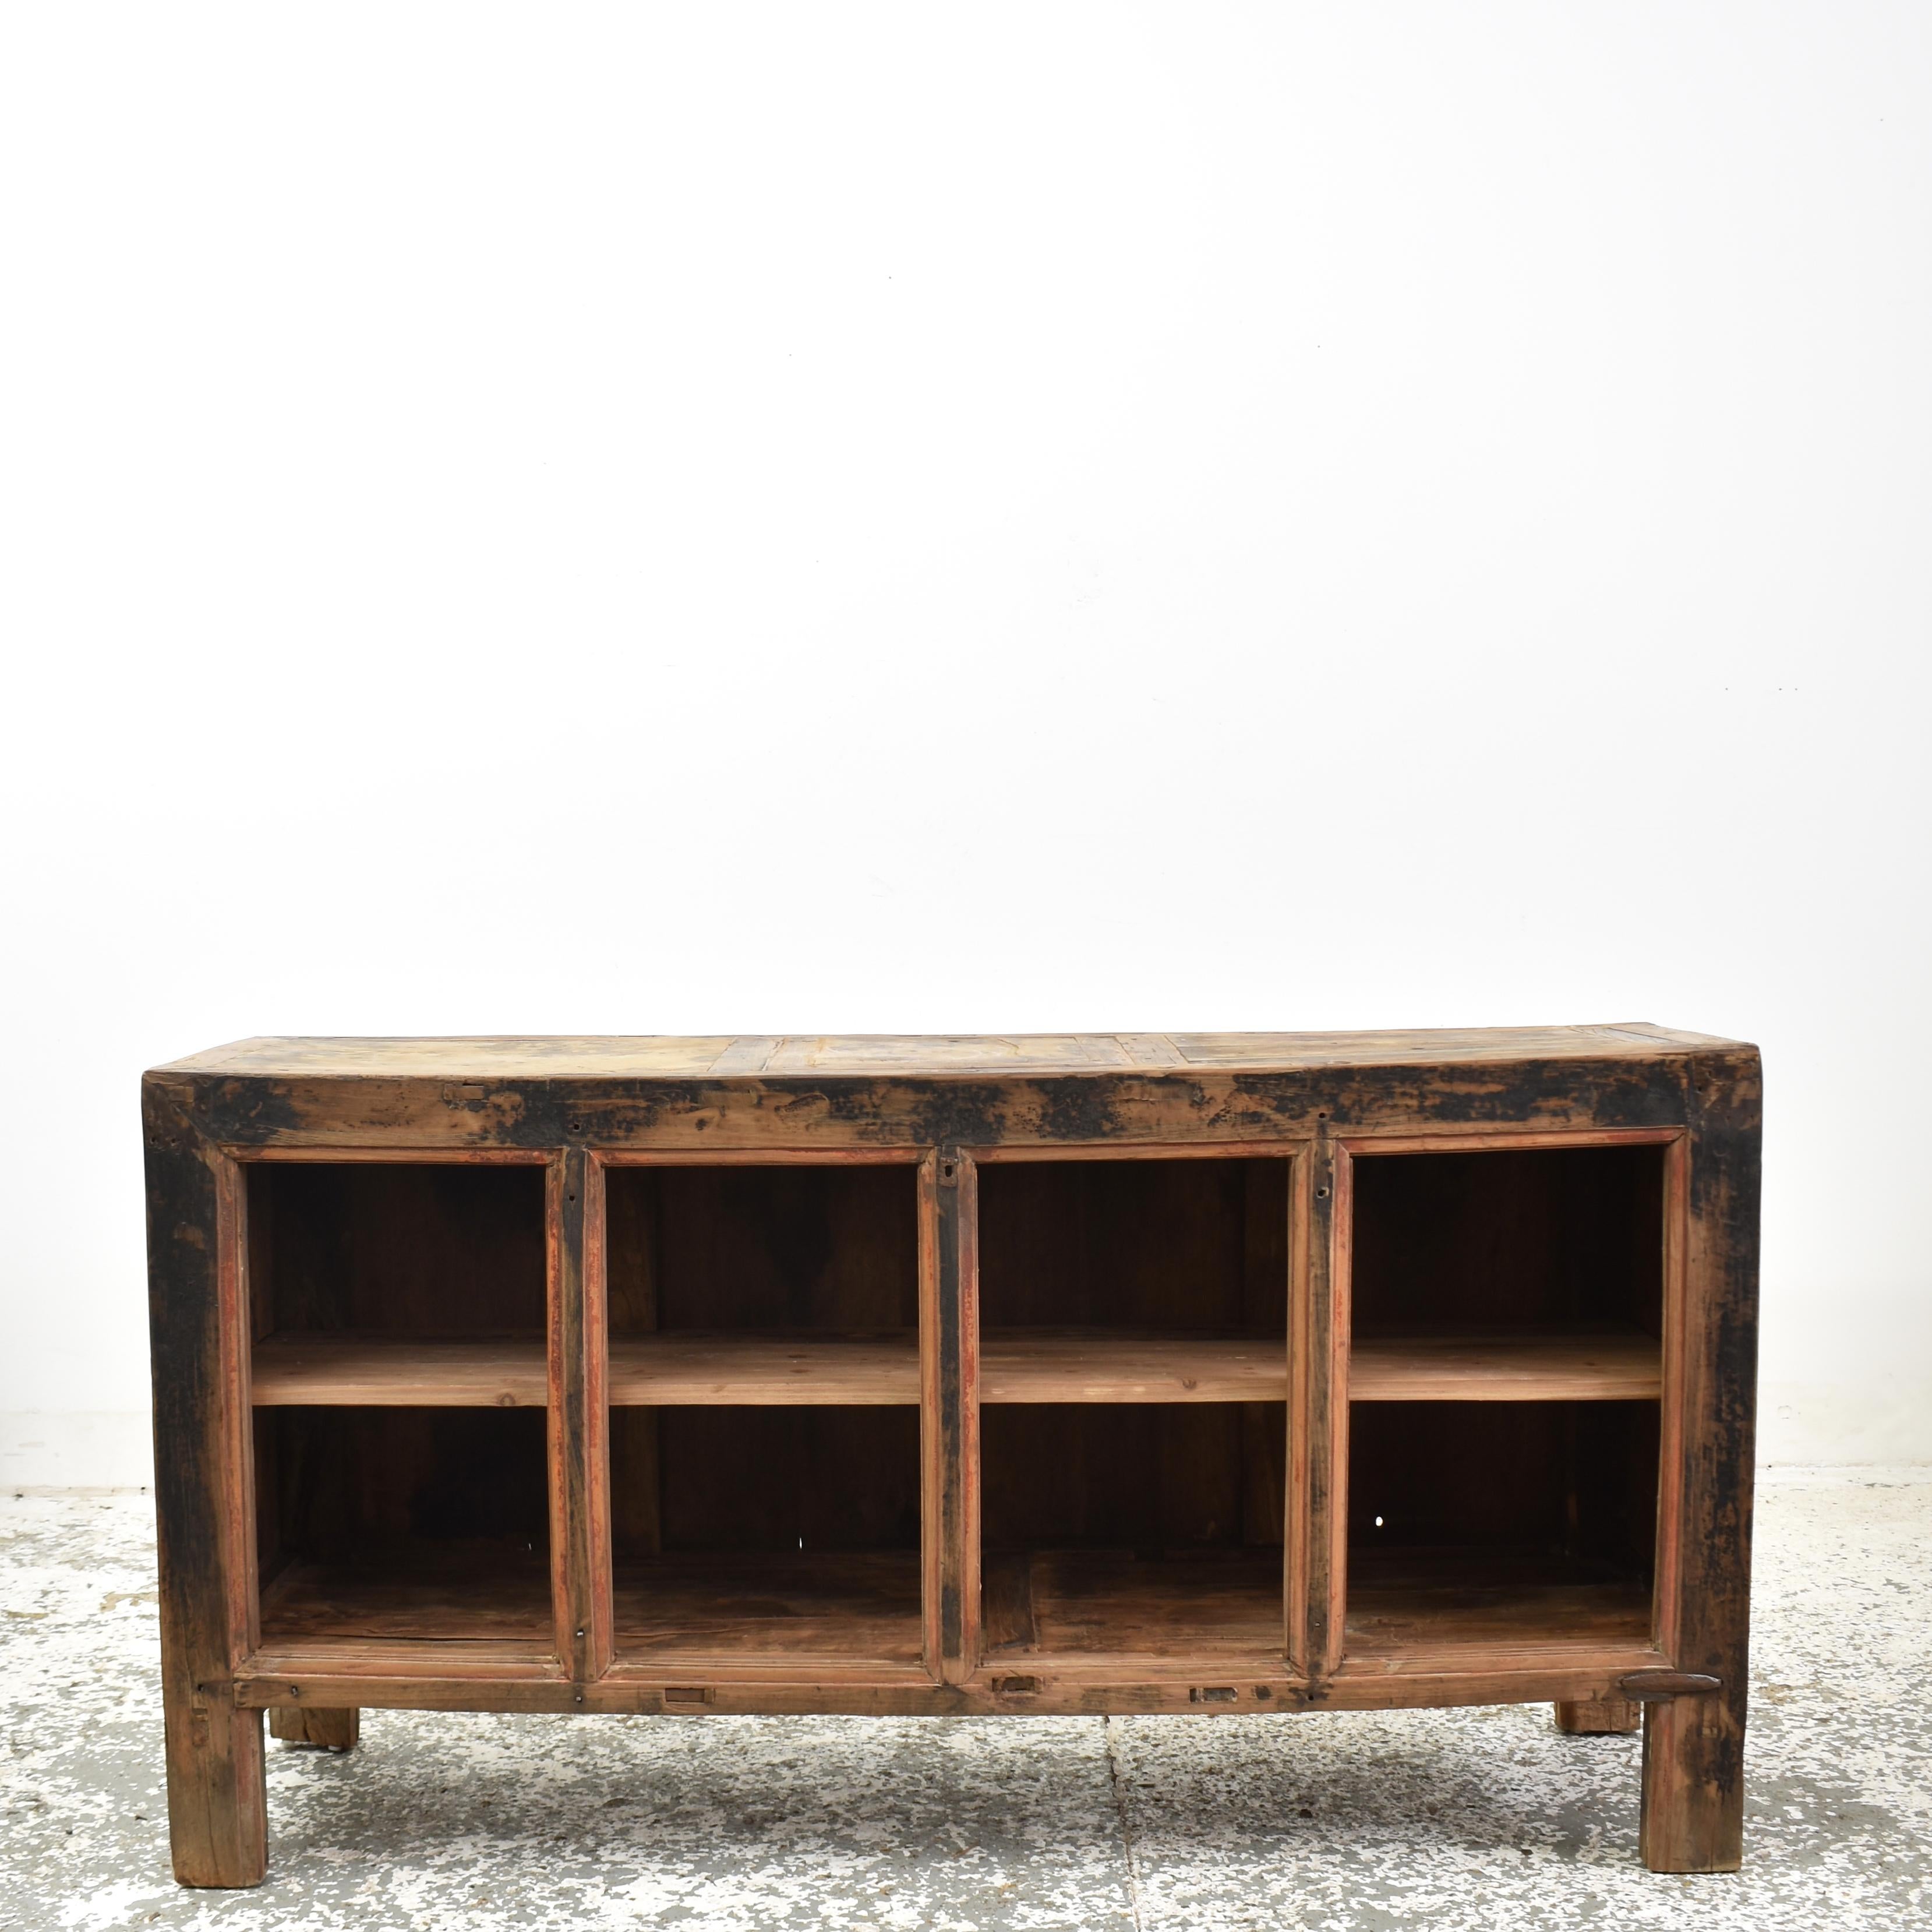 Antique Rustic Elm Haberdashery Kitchen Island Storage Sideboard – C

A lovely rustic open fronted storage shelving sideboard. The cabinet is constructed from elm wood with a pine panelled back. There is a central shelf which continues behind the 3